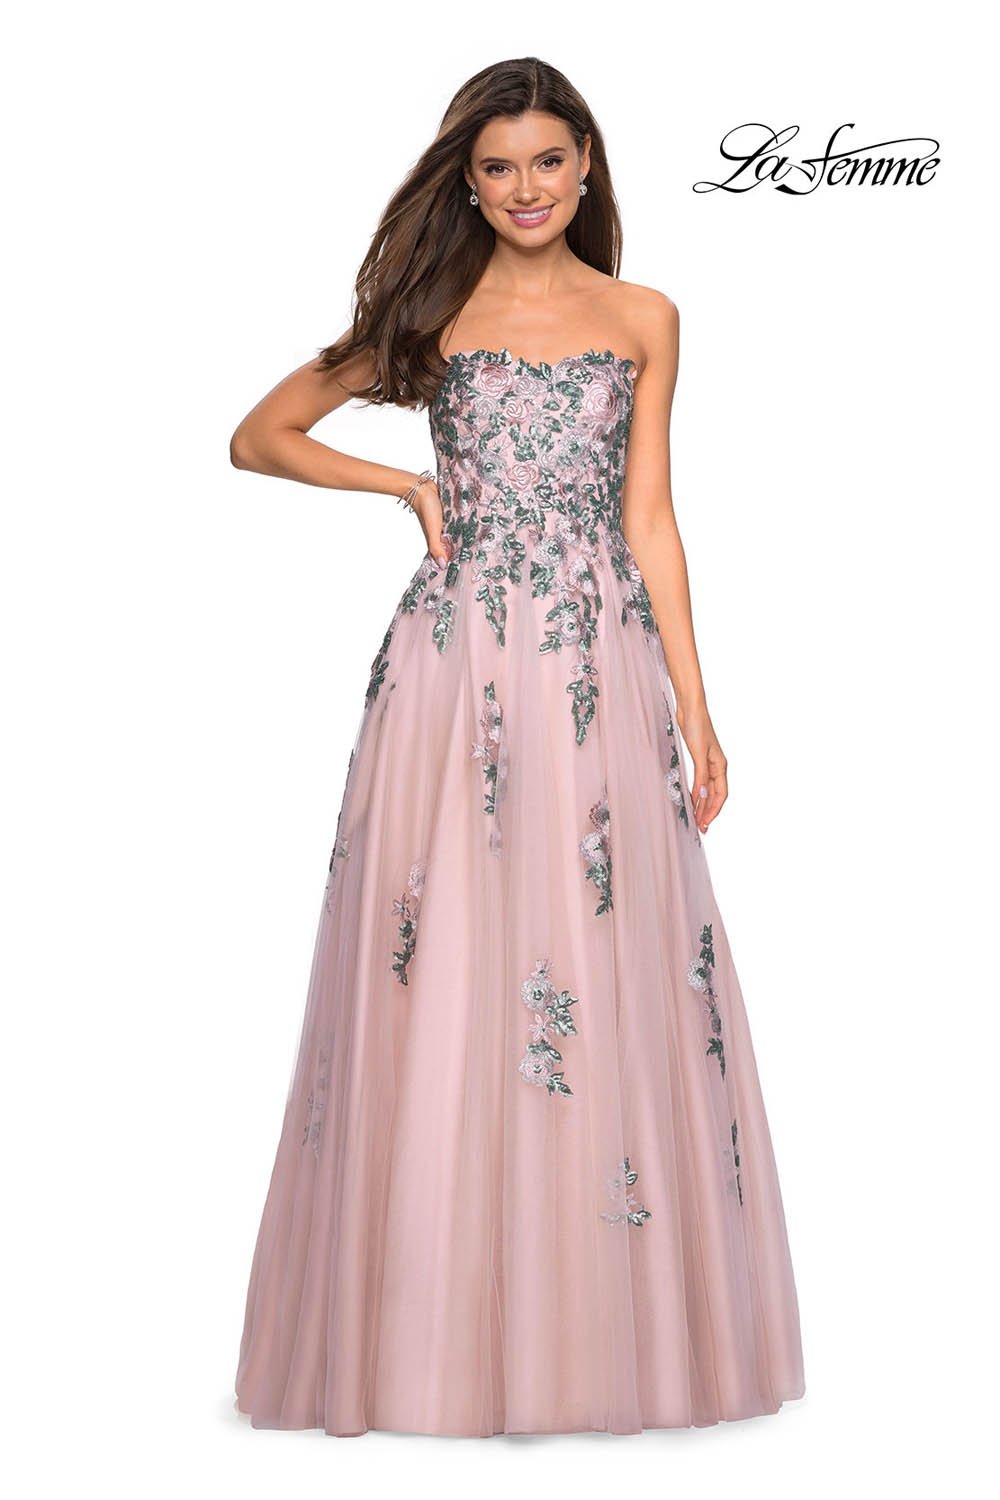 Gigi by La Femme 27816 dress images in these colors: Blush.